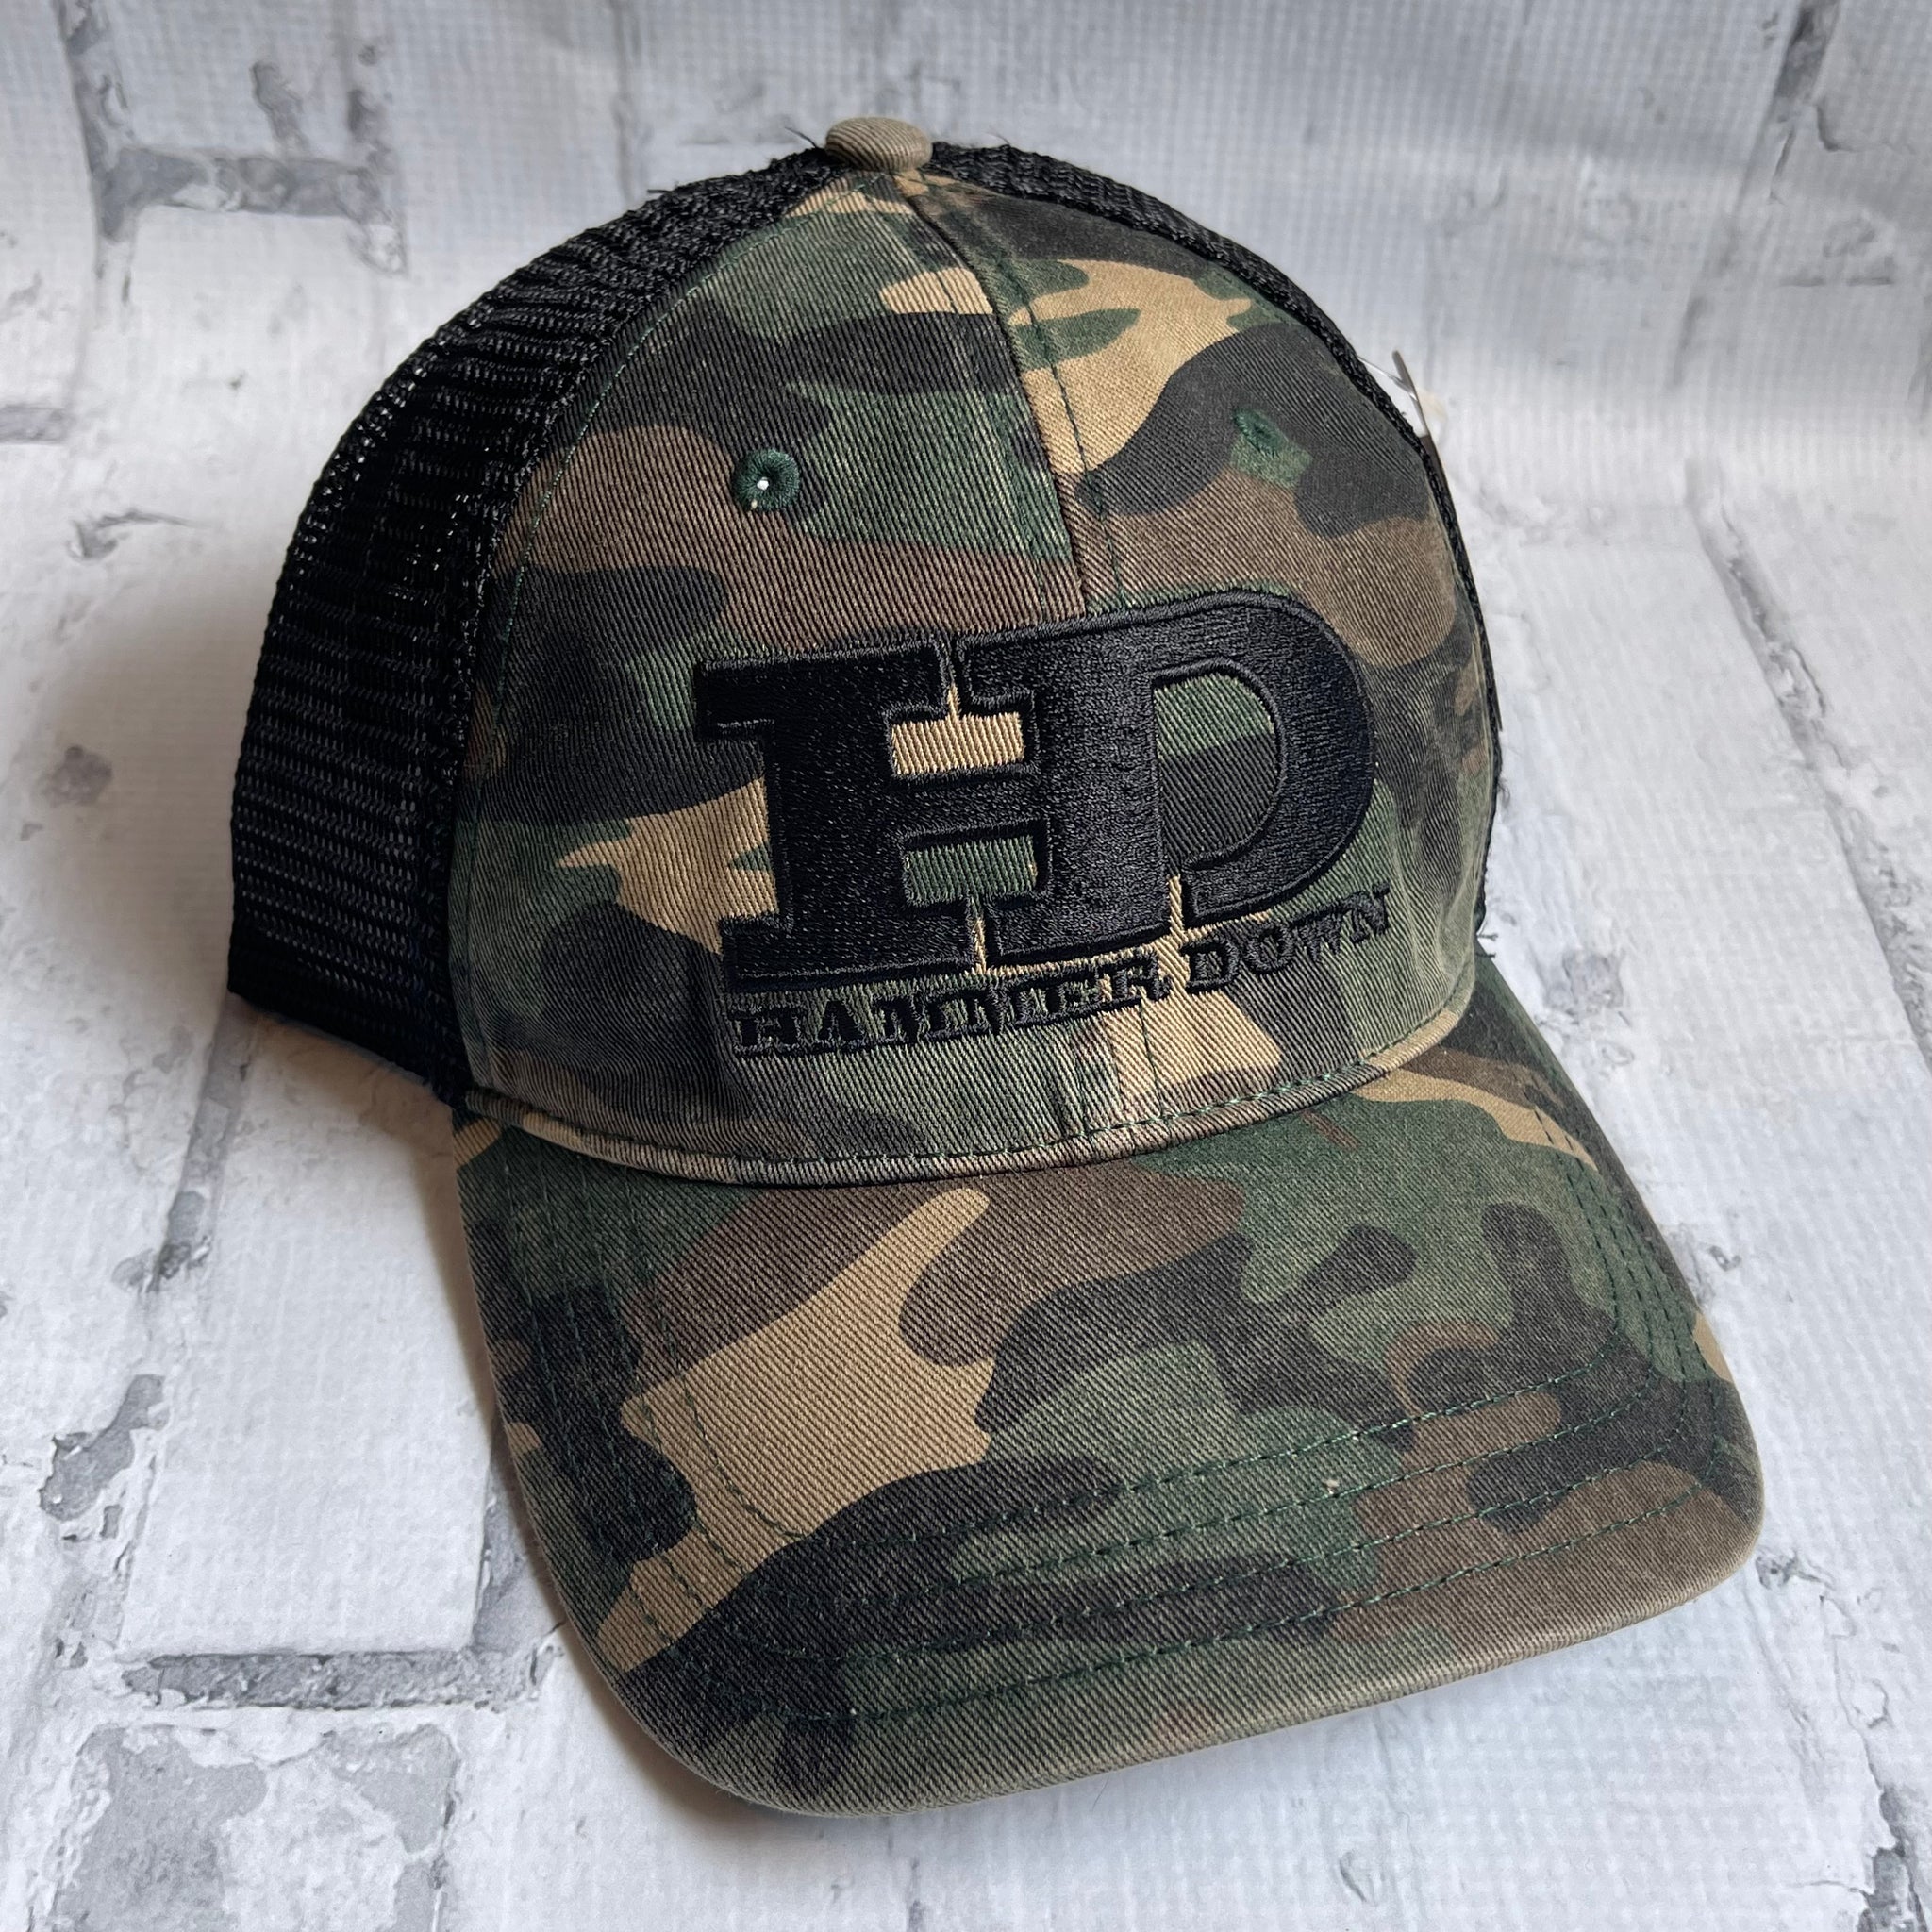 Hammer Down "HD Original" Hat - Camo with Woven Patch - Southern Charm "Shop The Charm"